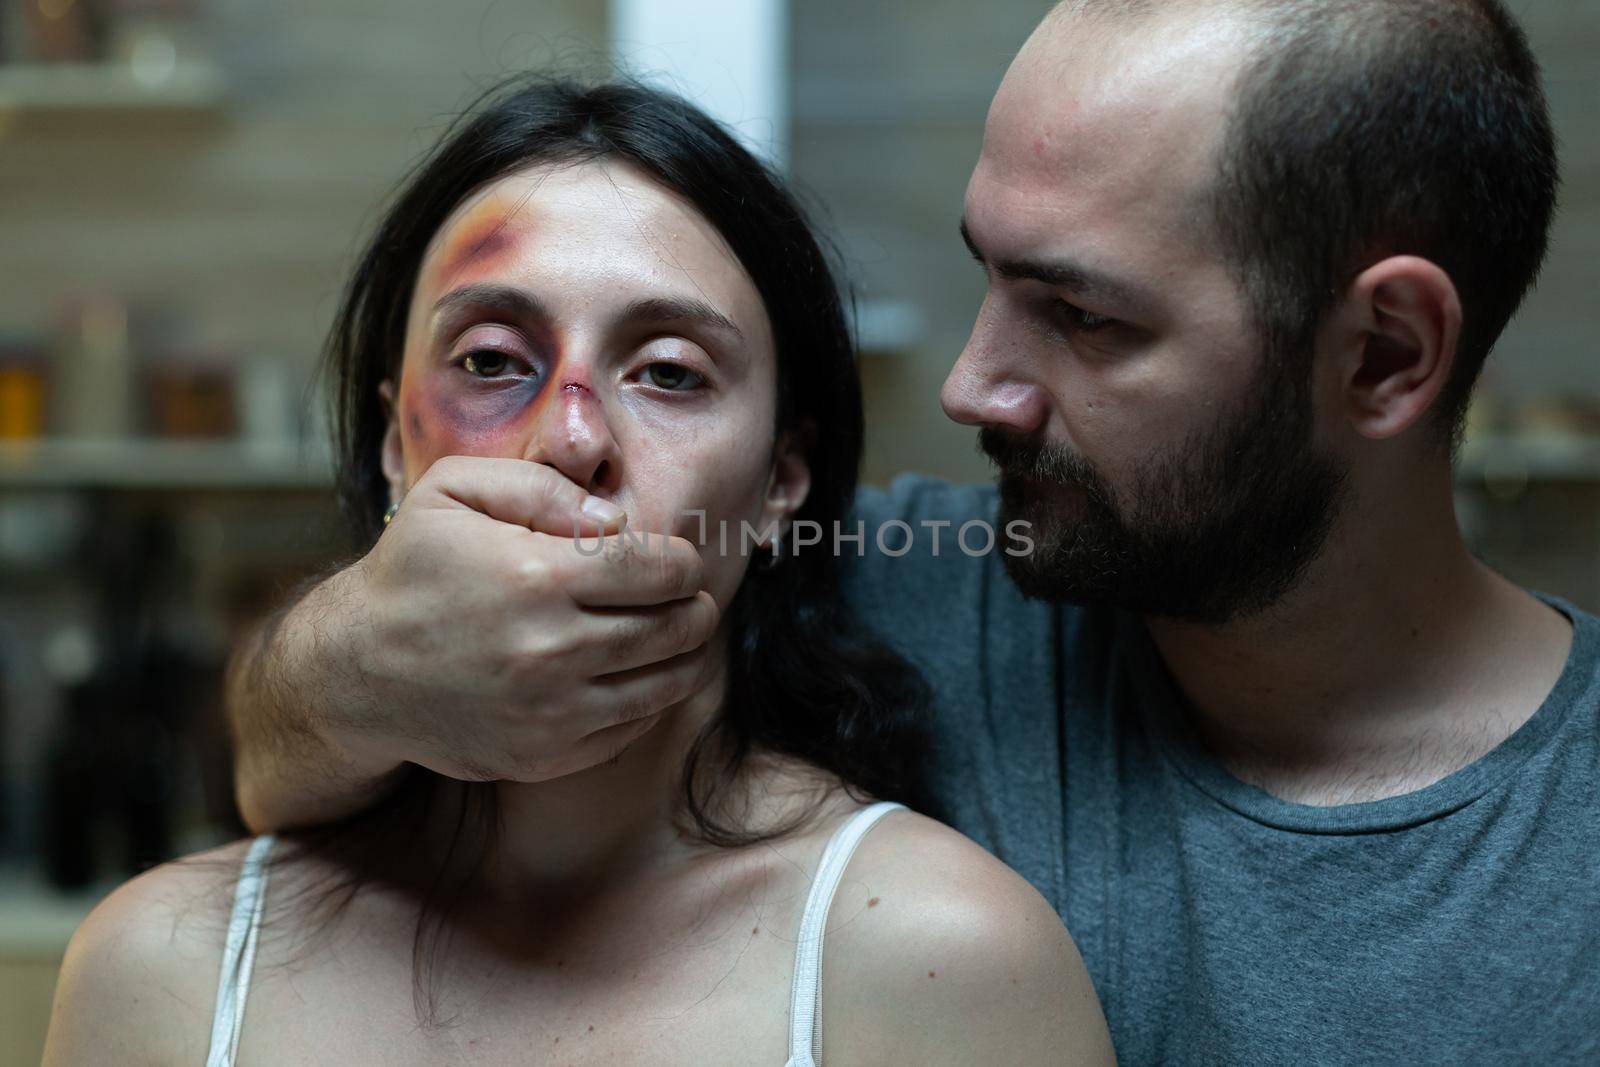 Criminal adult abusing afraid woman with bruises on face while holding hand on mouth for silence. Close up of couple with domestic issues and anger problems. Caucasian people violence